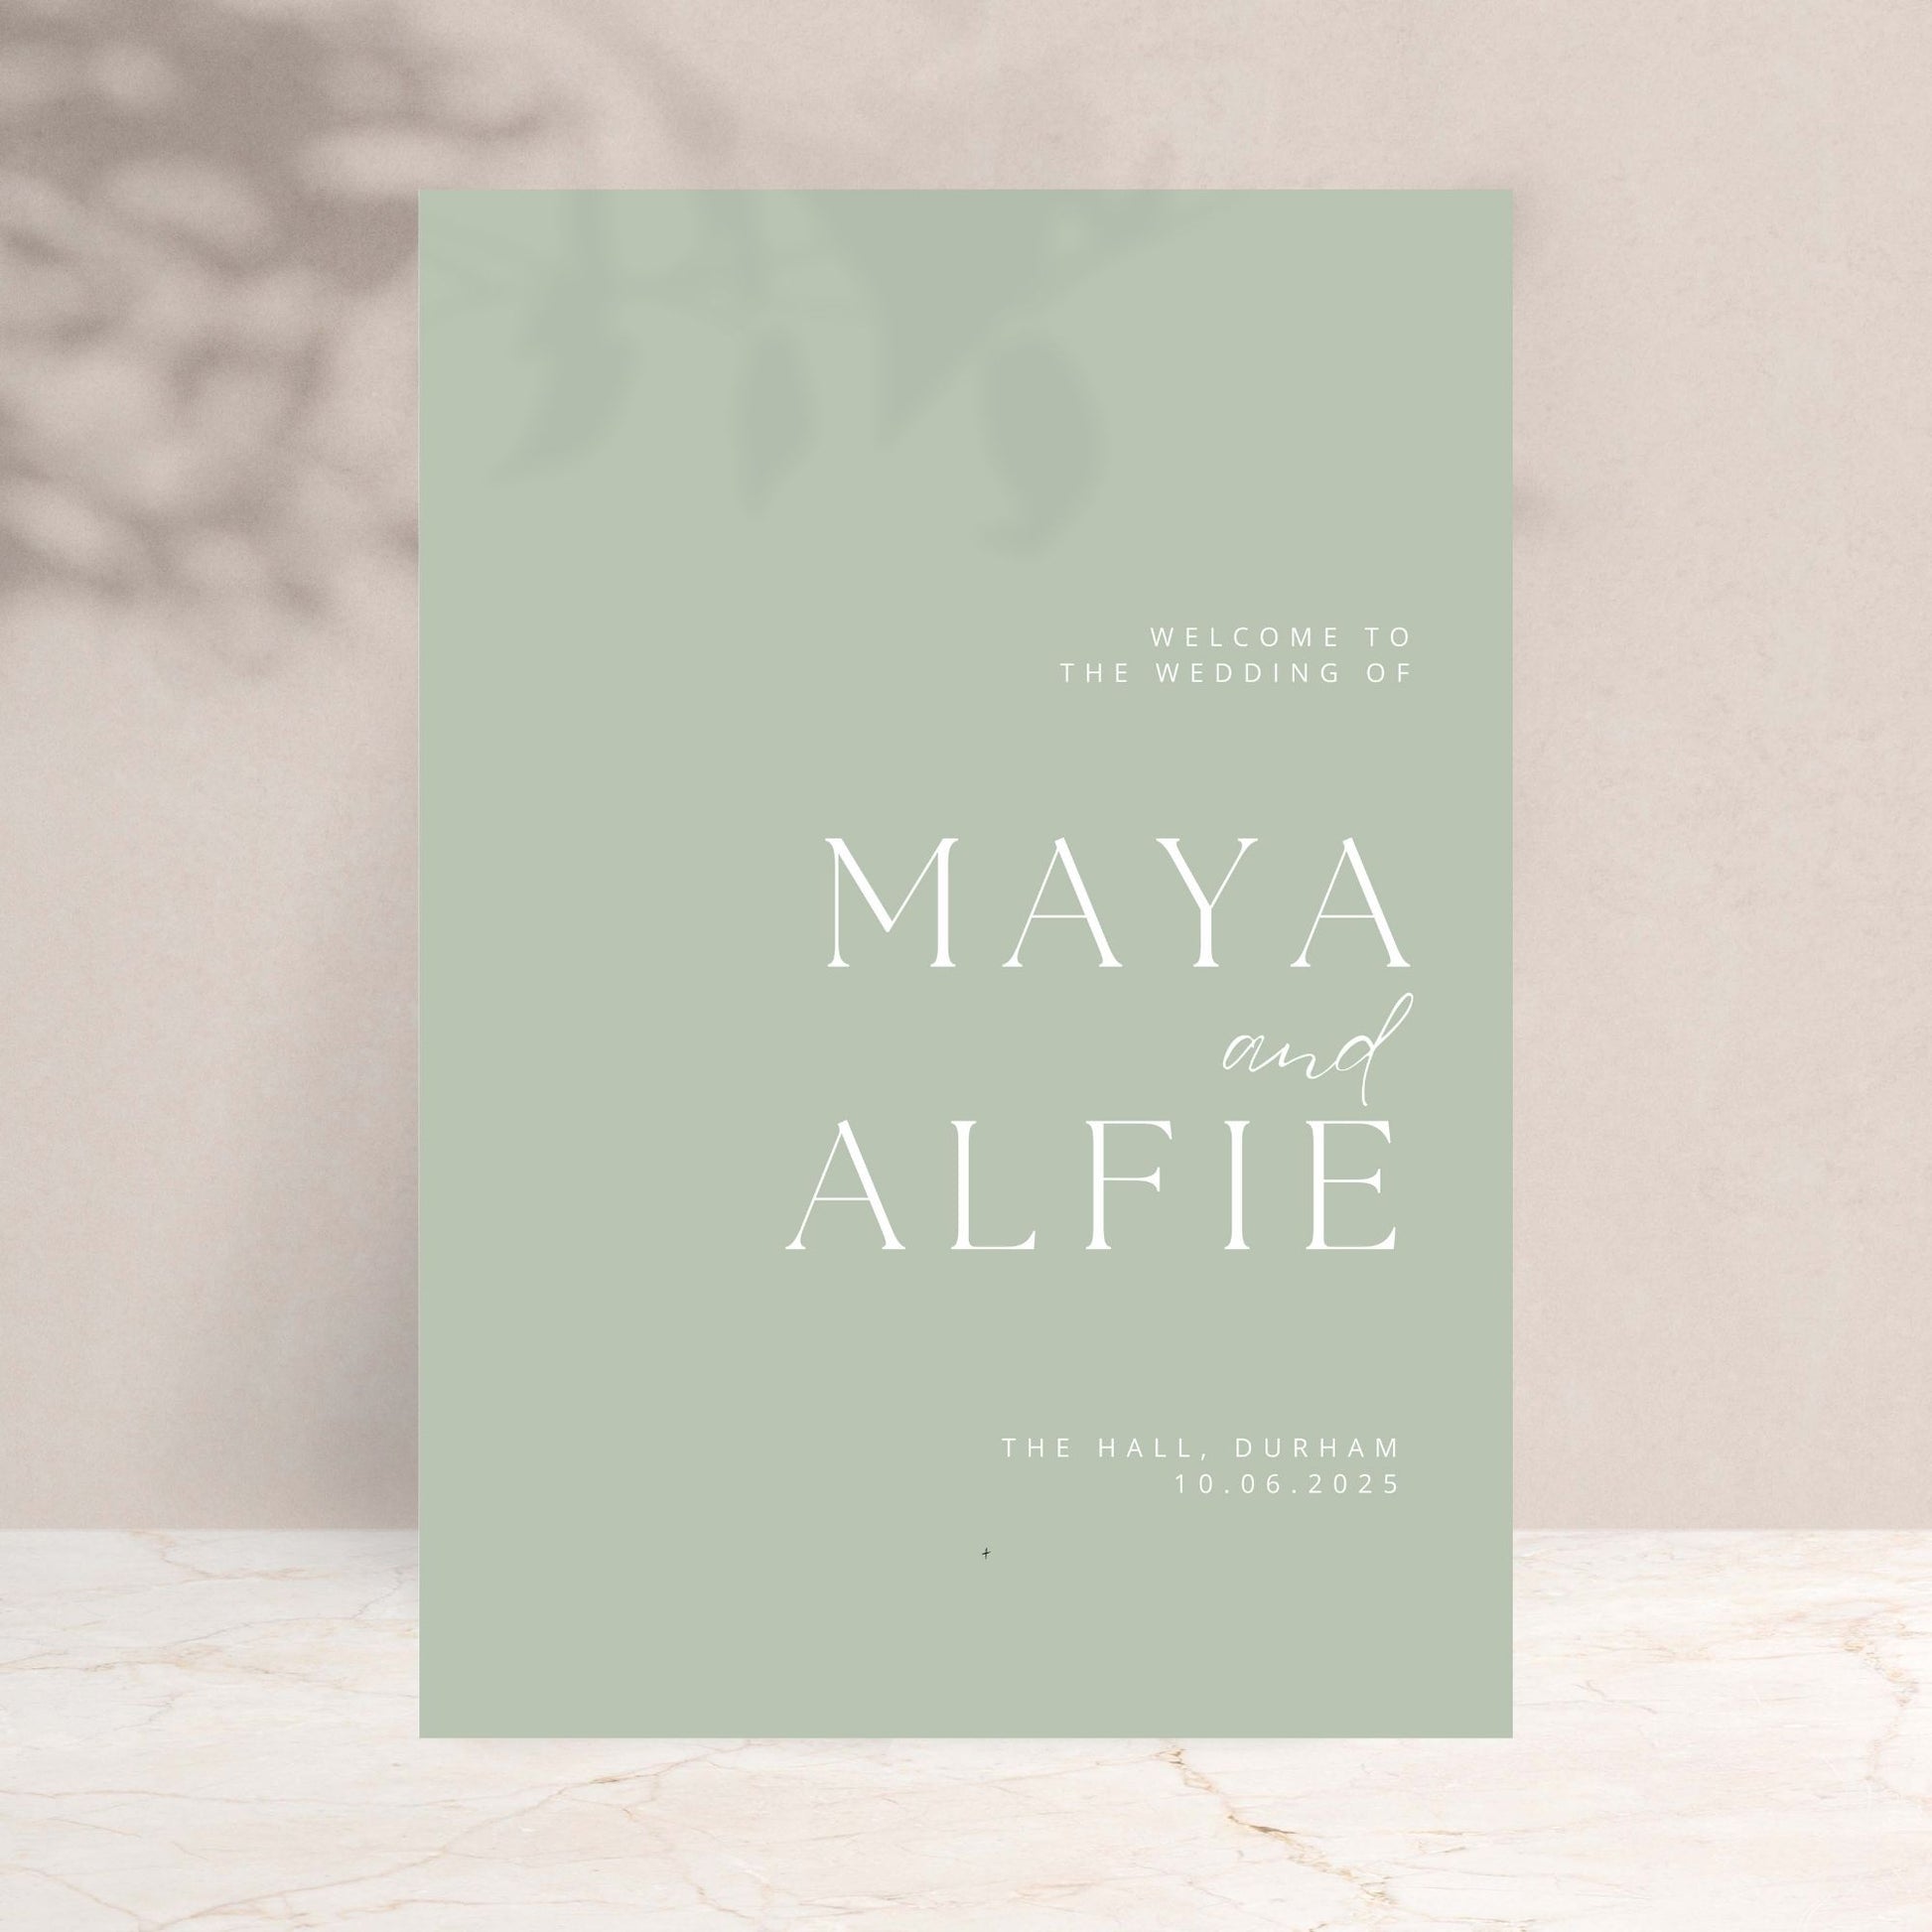 MAYA Wedding Welcome Sign - Wedding Ceremony Stationery available at The Ivy Collection | Luxury Wedding Stationery